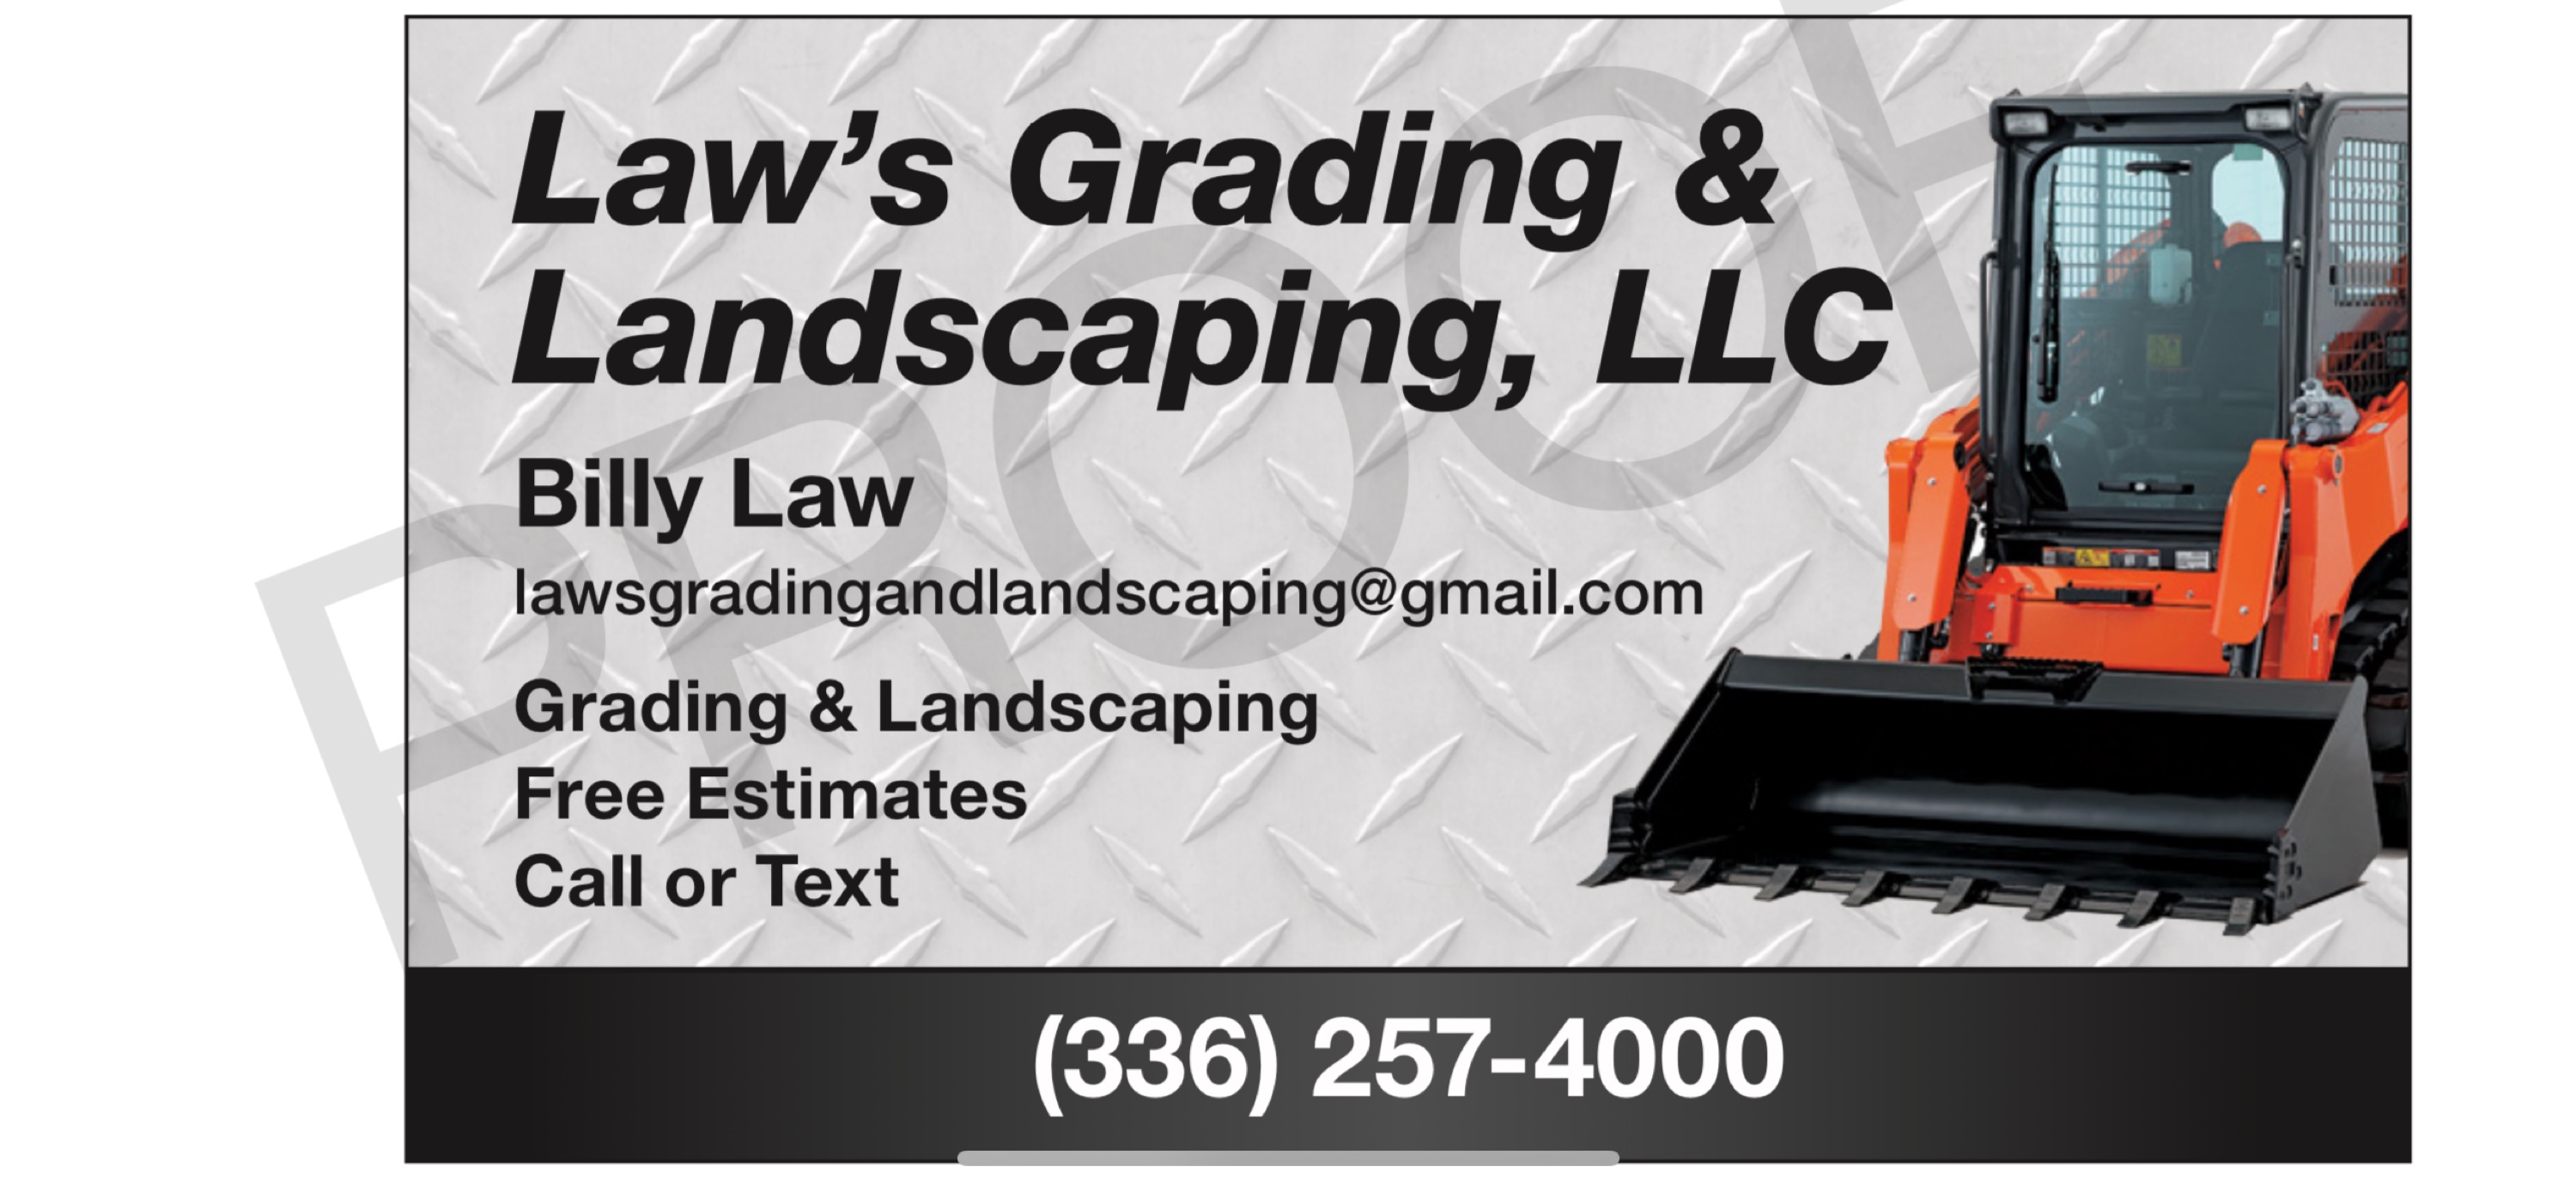 Law's Grading and Landscaping, LLC Logo